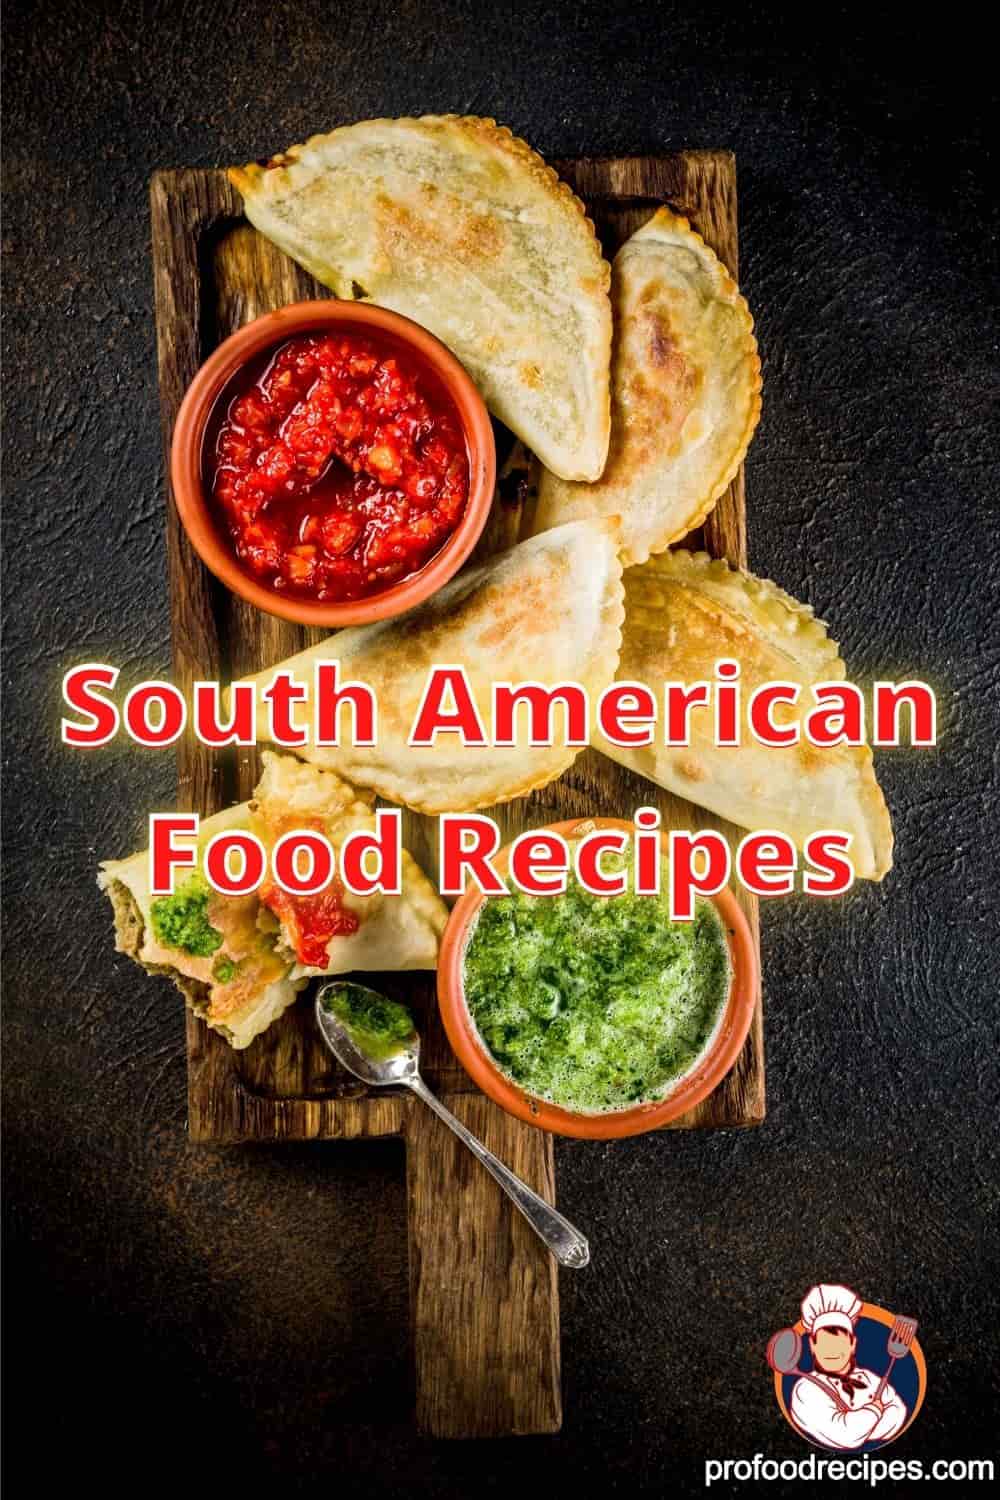 5-Best South American Food Recipes